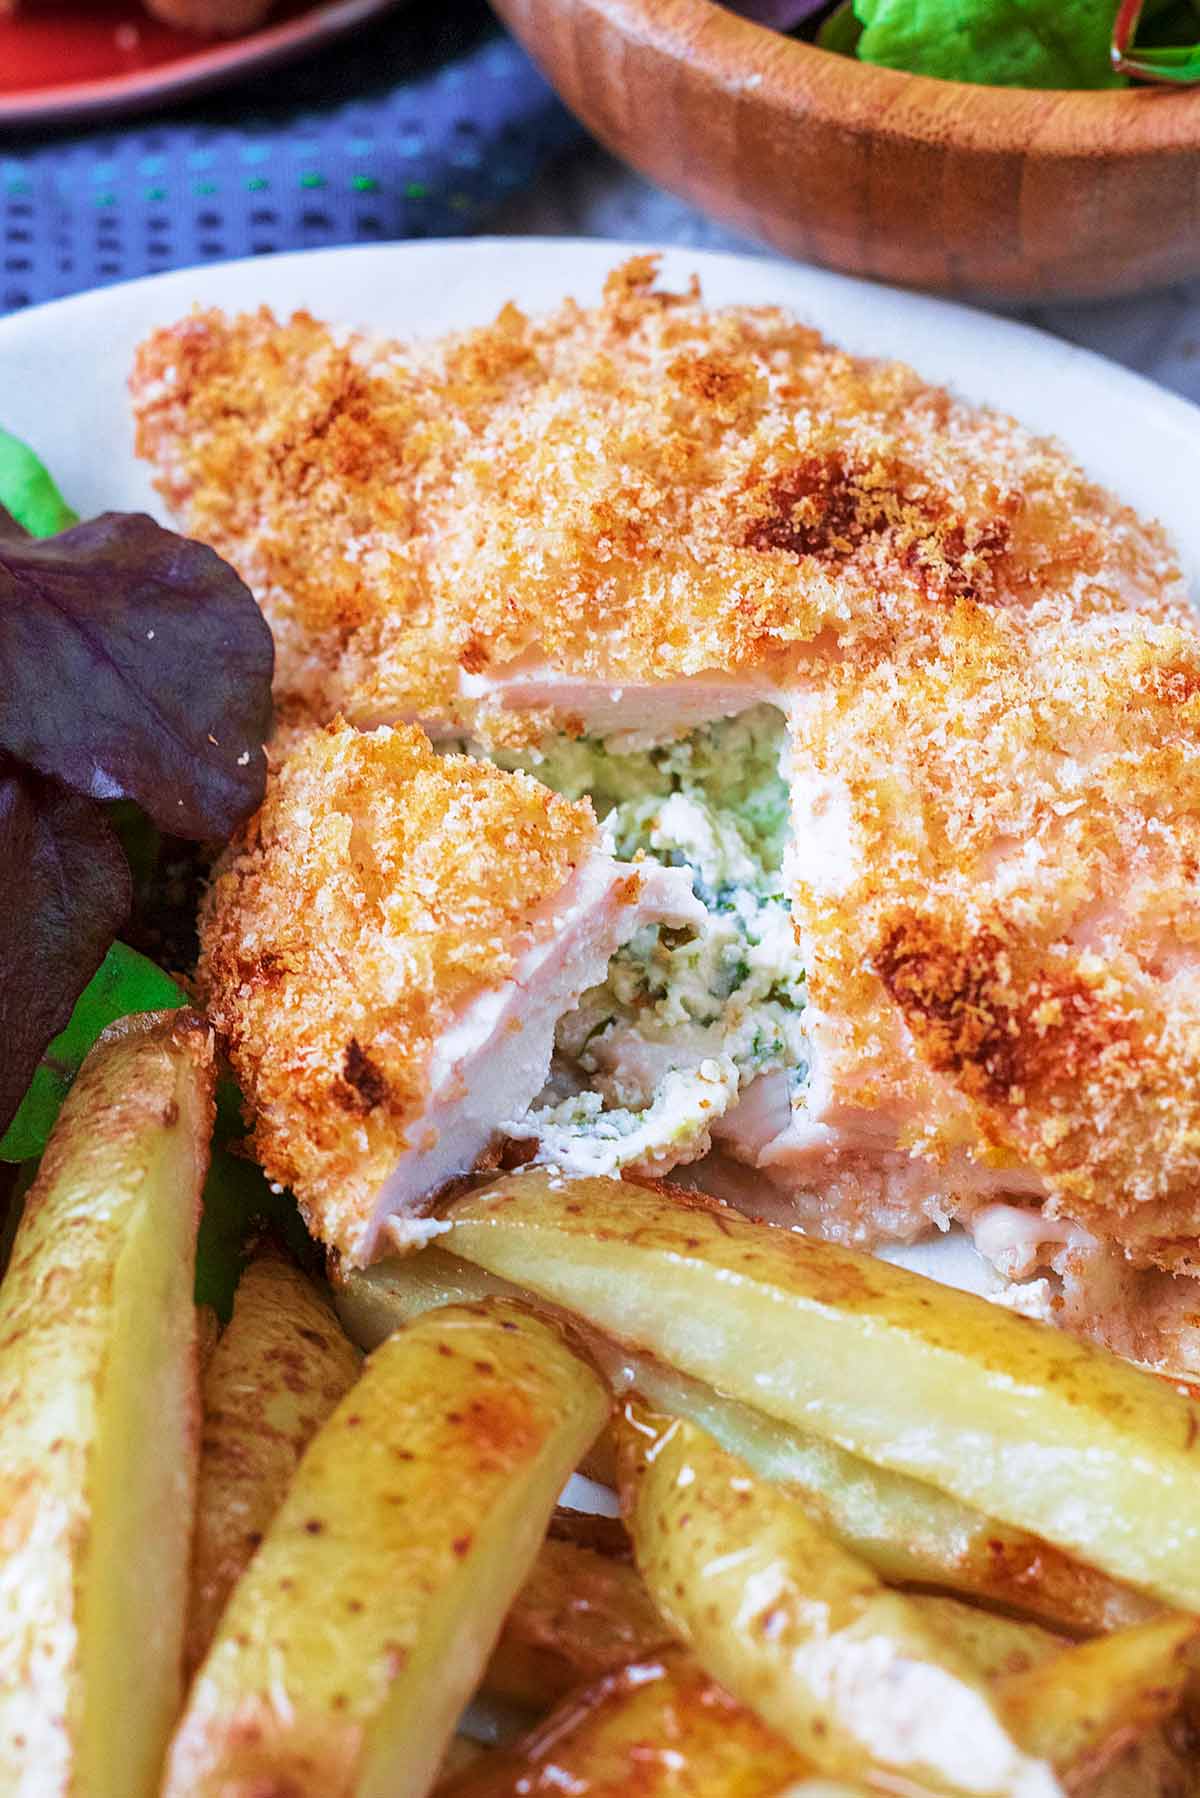 A chicken Kiev, cut open showing a cheese and herb filling.